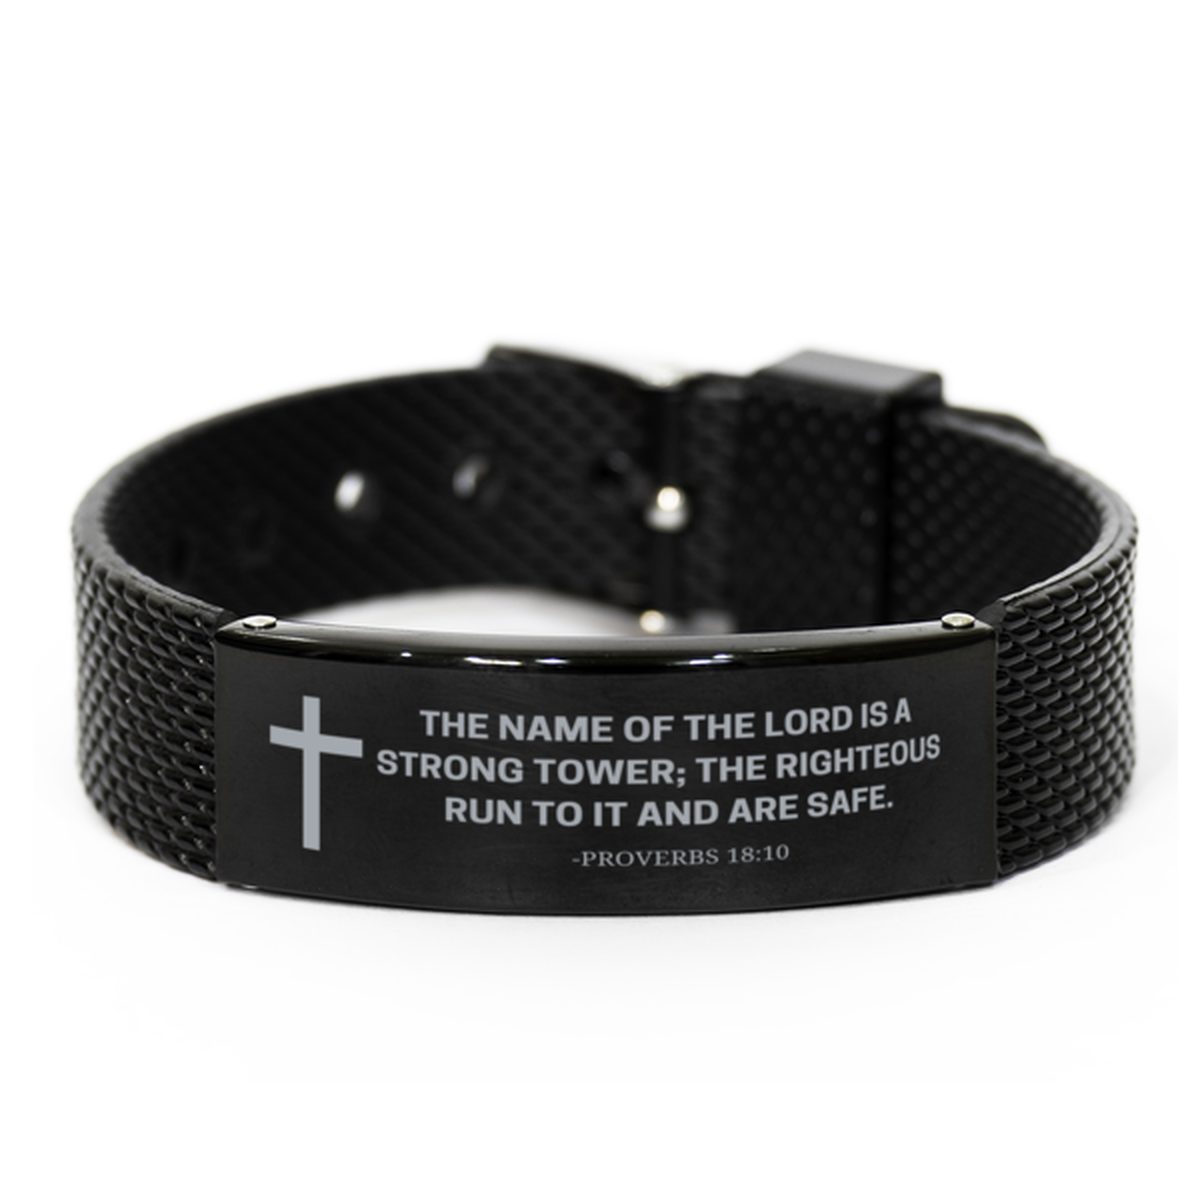 Baptism Gifts For Teenage Boys Girls, Christian Bible Verse Black Shark Mesh Bracelet, The name of the Lord is a strong, Catholic Confirmation Gifts for Son, Godson, Grandson, Nephew